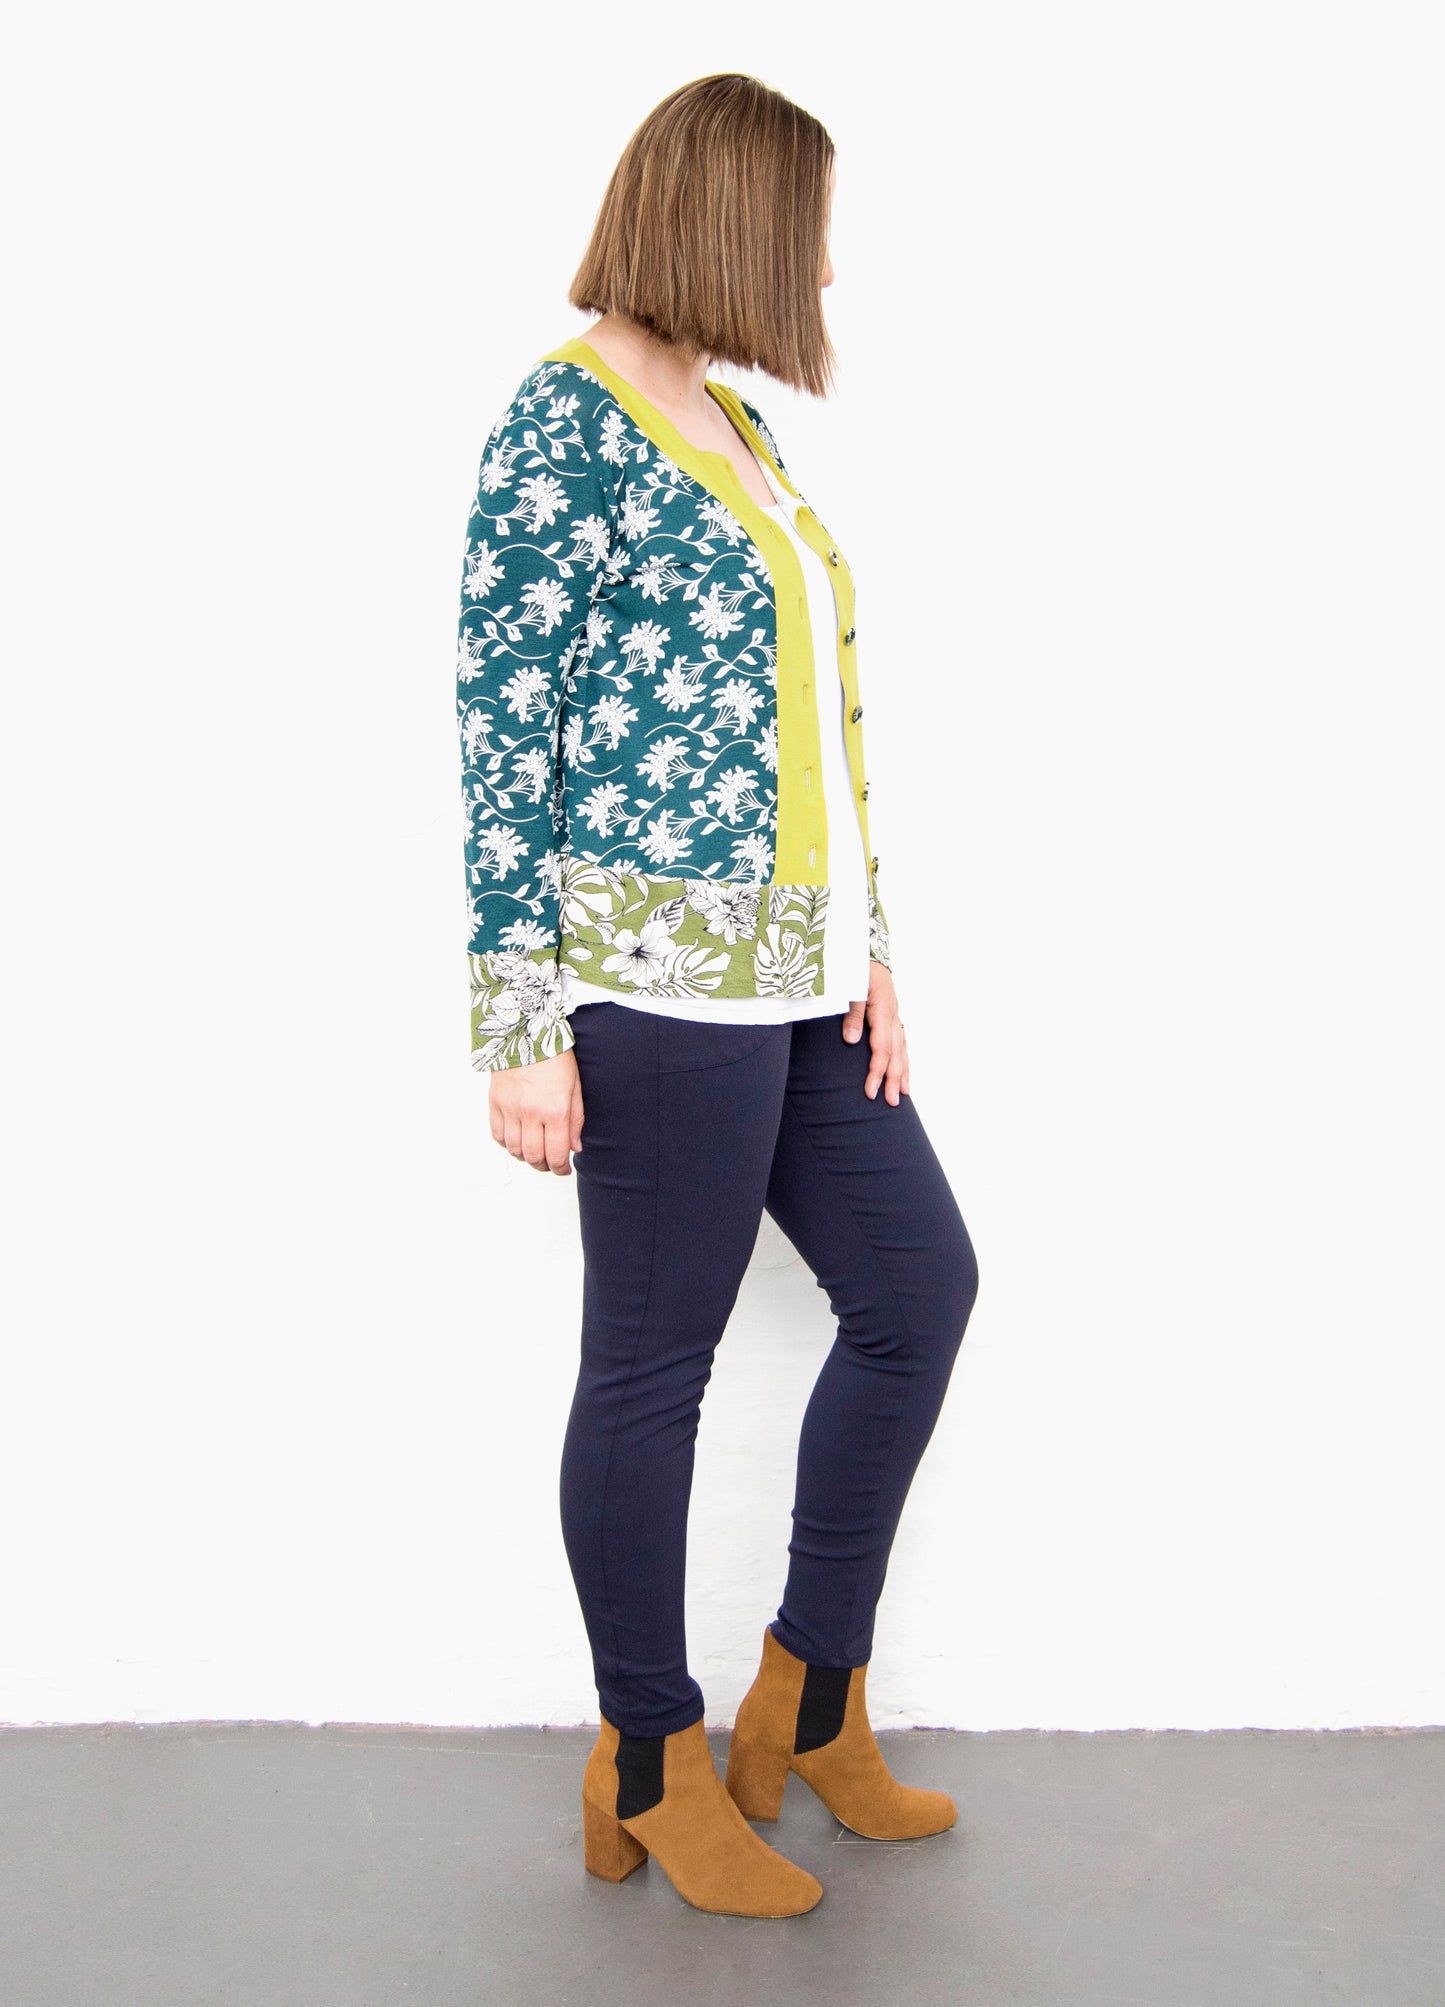 Cassia Cardigan in forest Mahina Moon